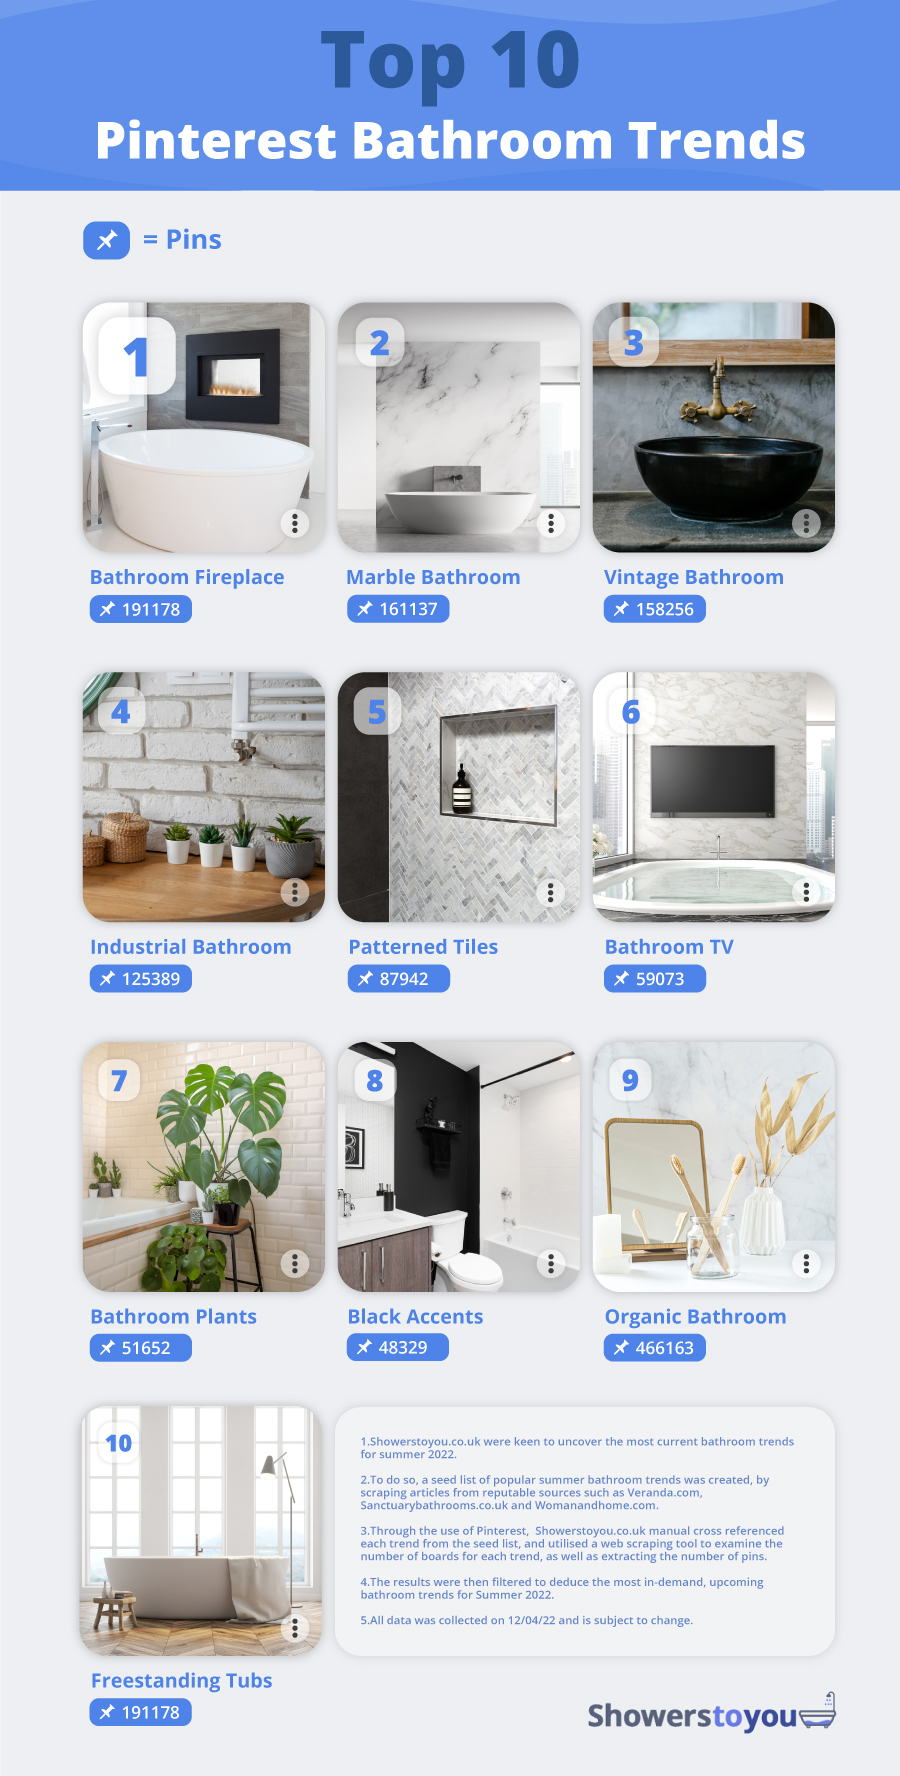 The top 10 summer bathroom trends for 2022 visualised.